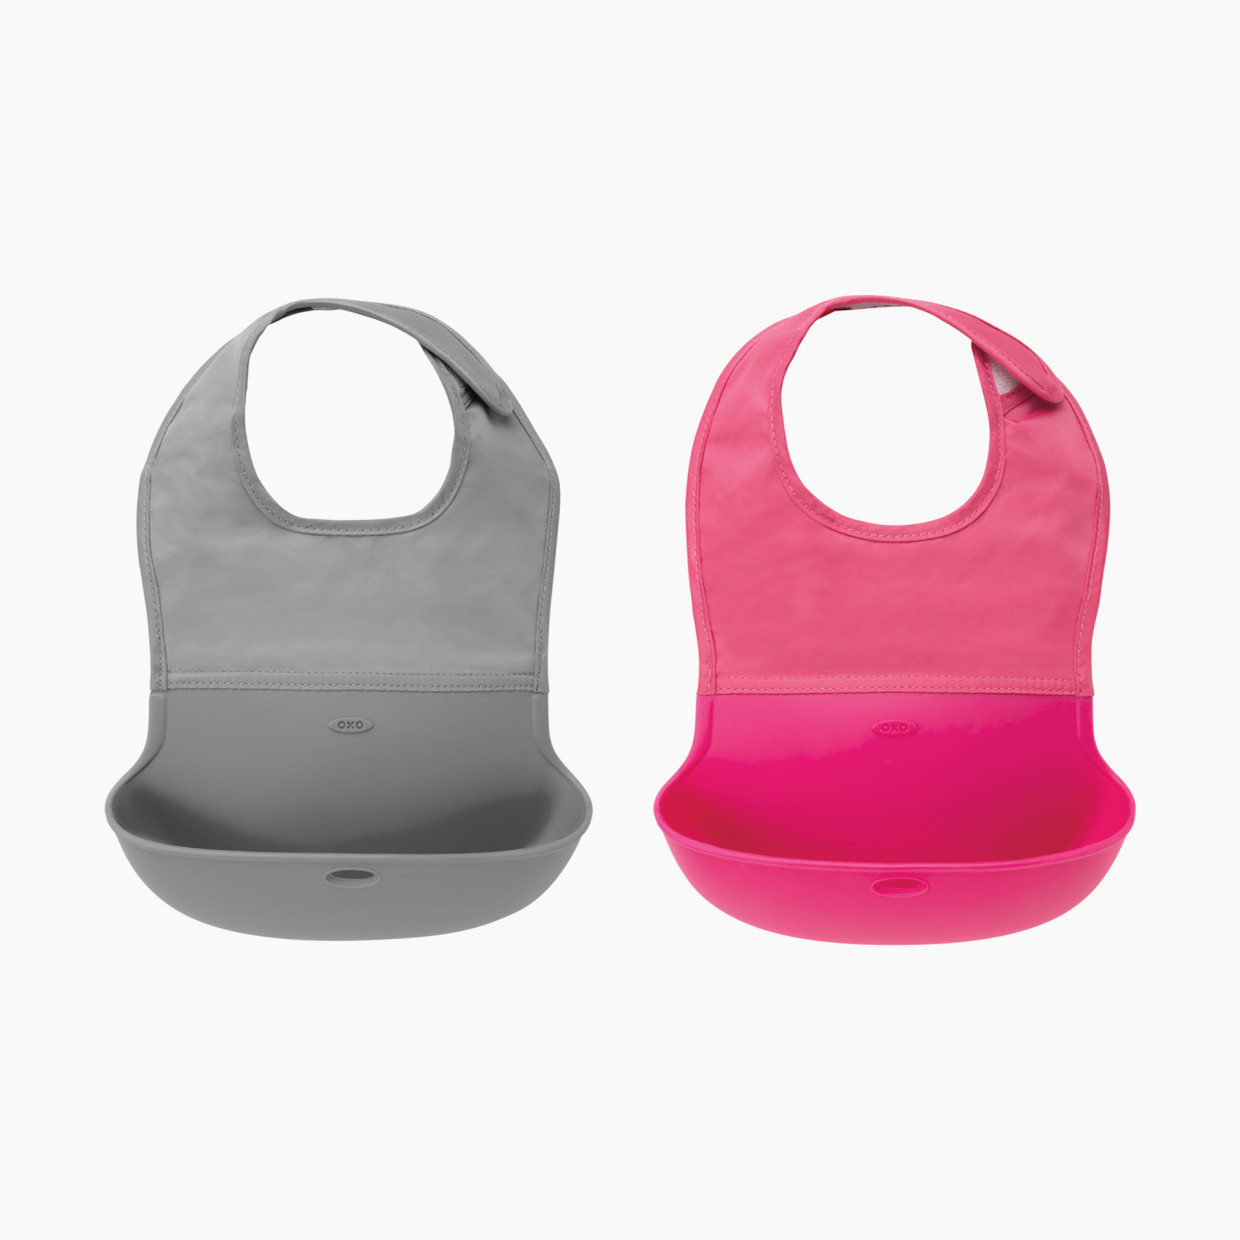 OXO Tot Roll Up Bib (2 Pack) - Grey/Pink.